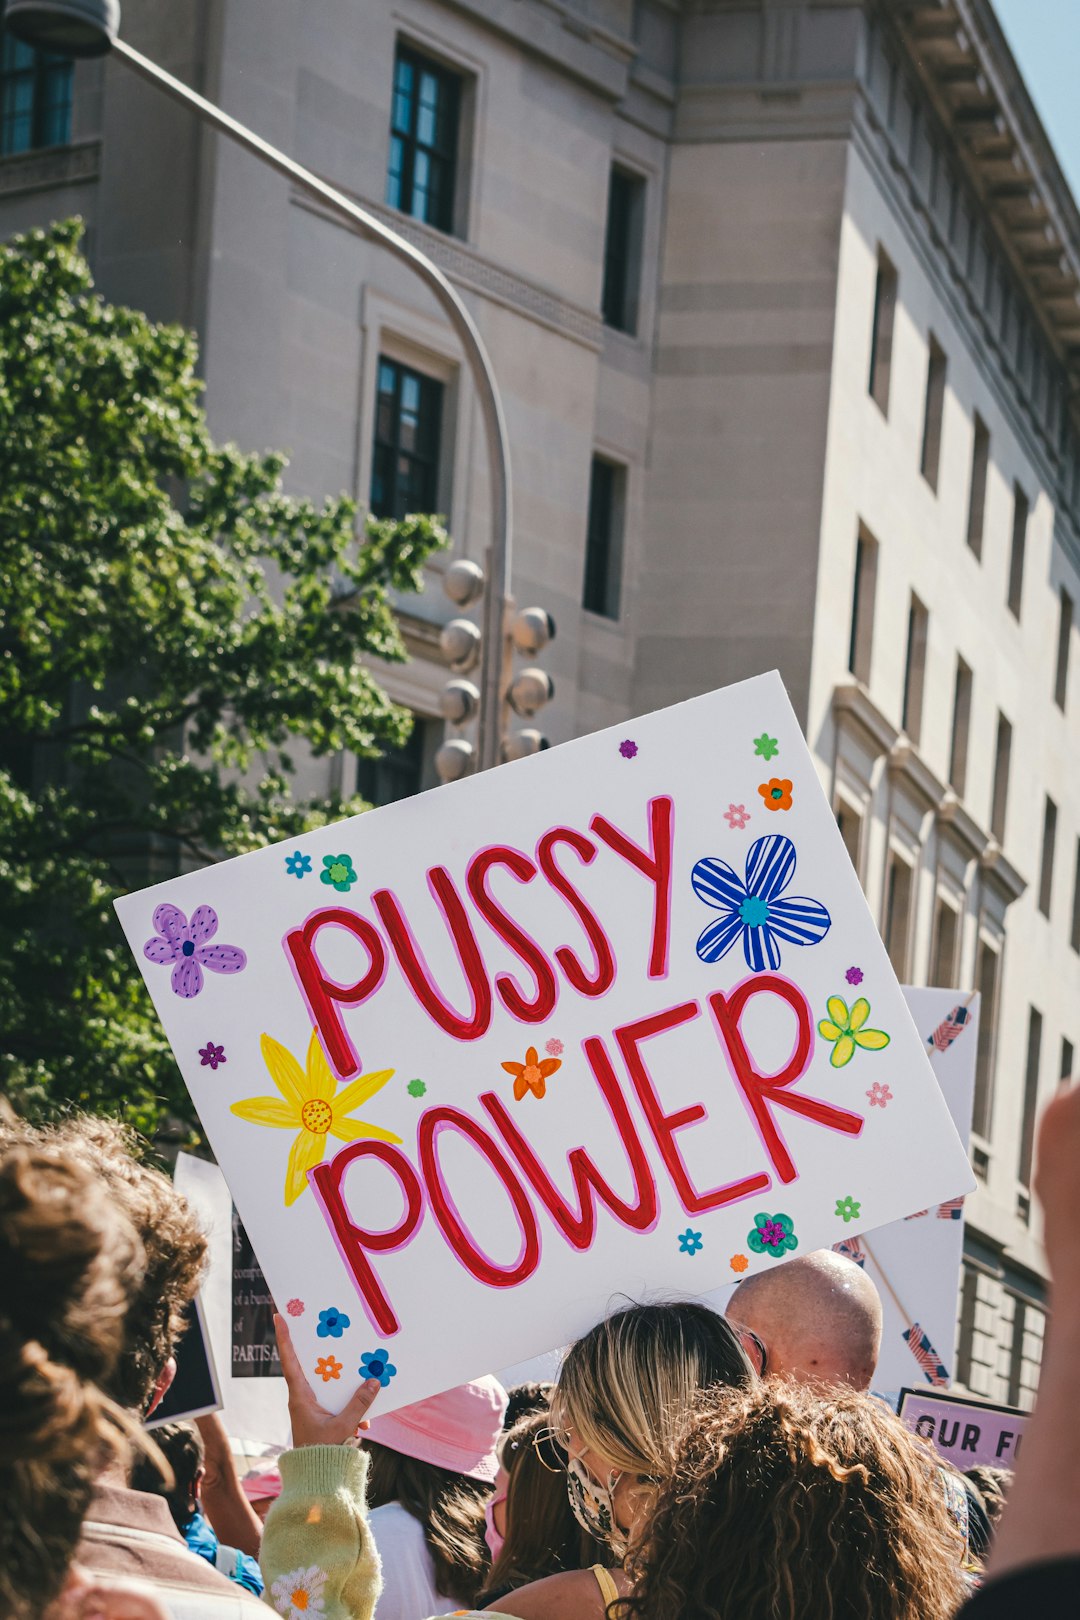 a person holding a sign that says pussy power